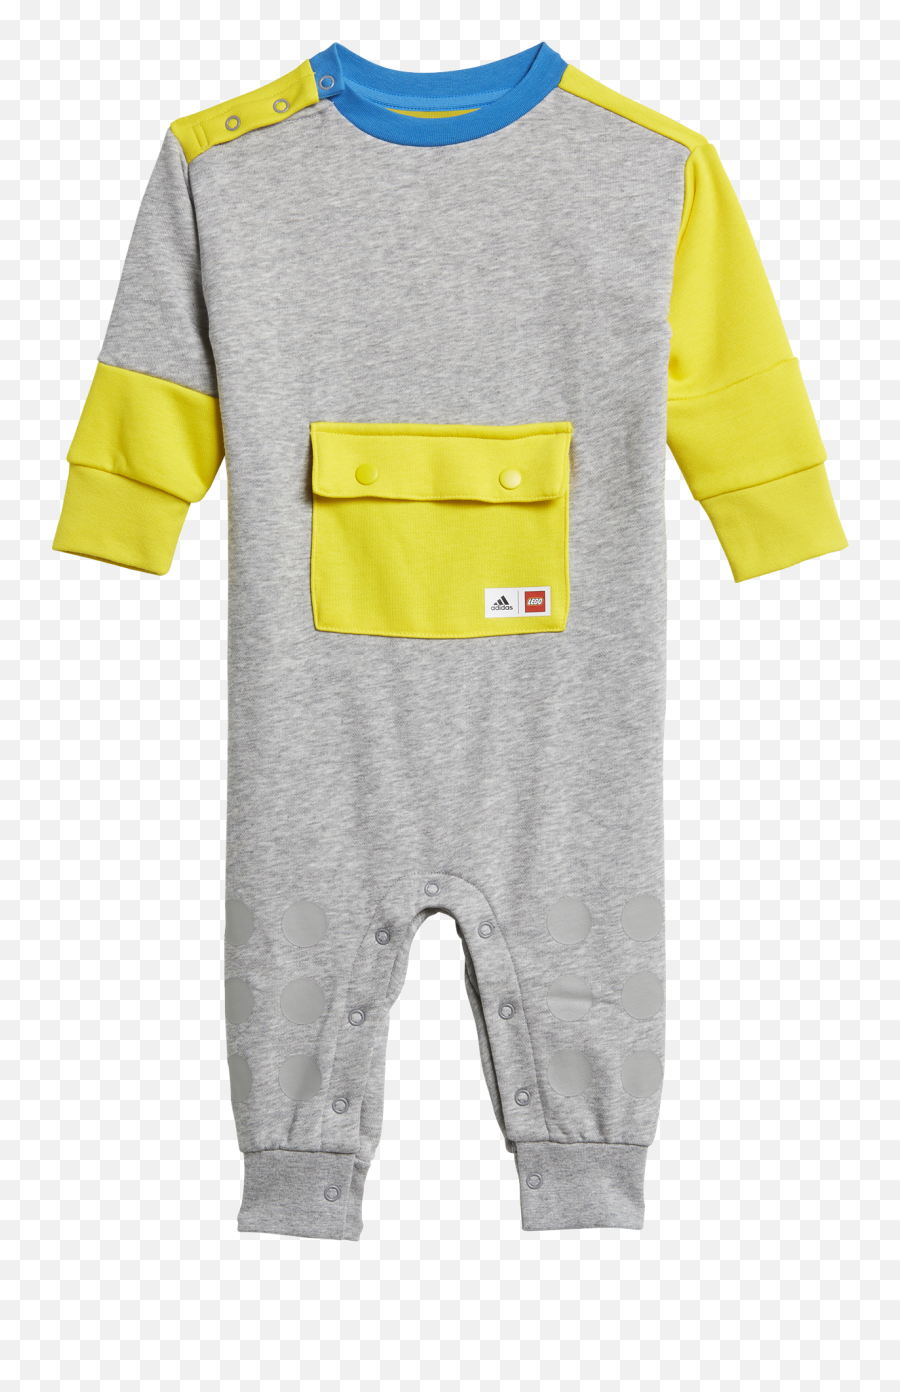 Clothing Extras Official Lego Shop Us - Adidas Lego Baby Clothes Emoji,Marvel Character Emotion T Shirts Kid